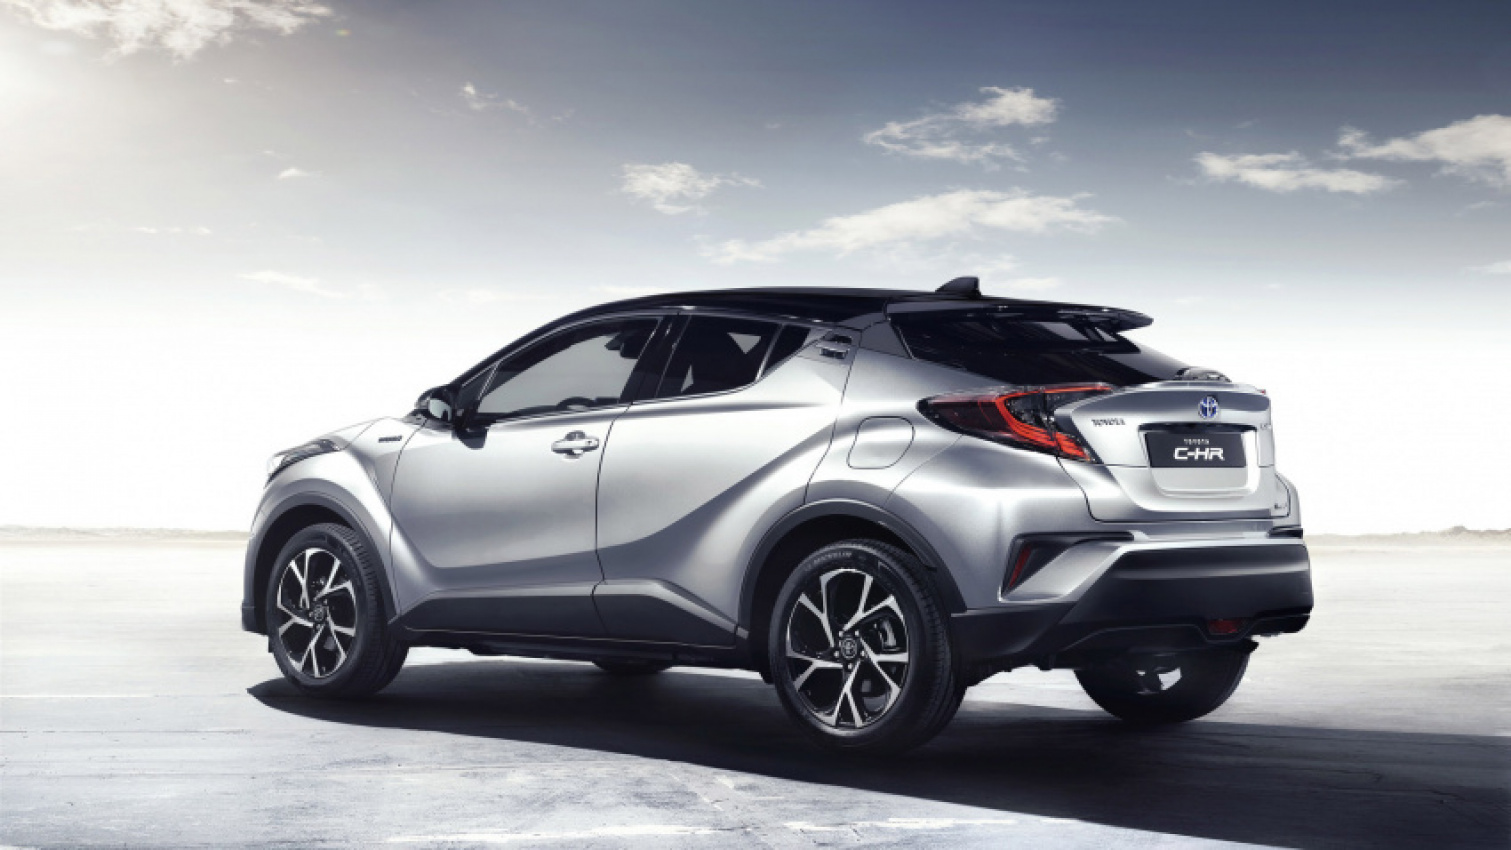 autos, cars, toyota, toyota reveals first images and details about c-hr’s interior